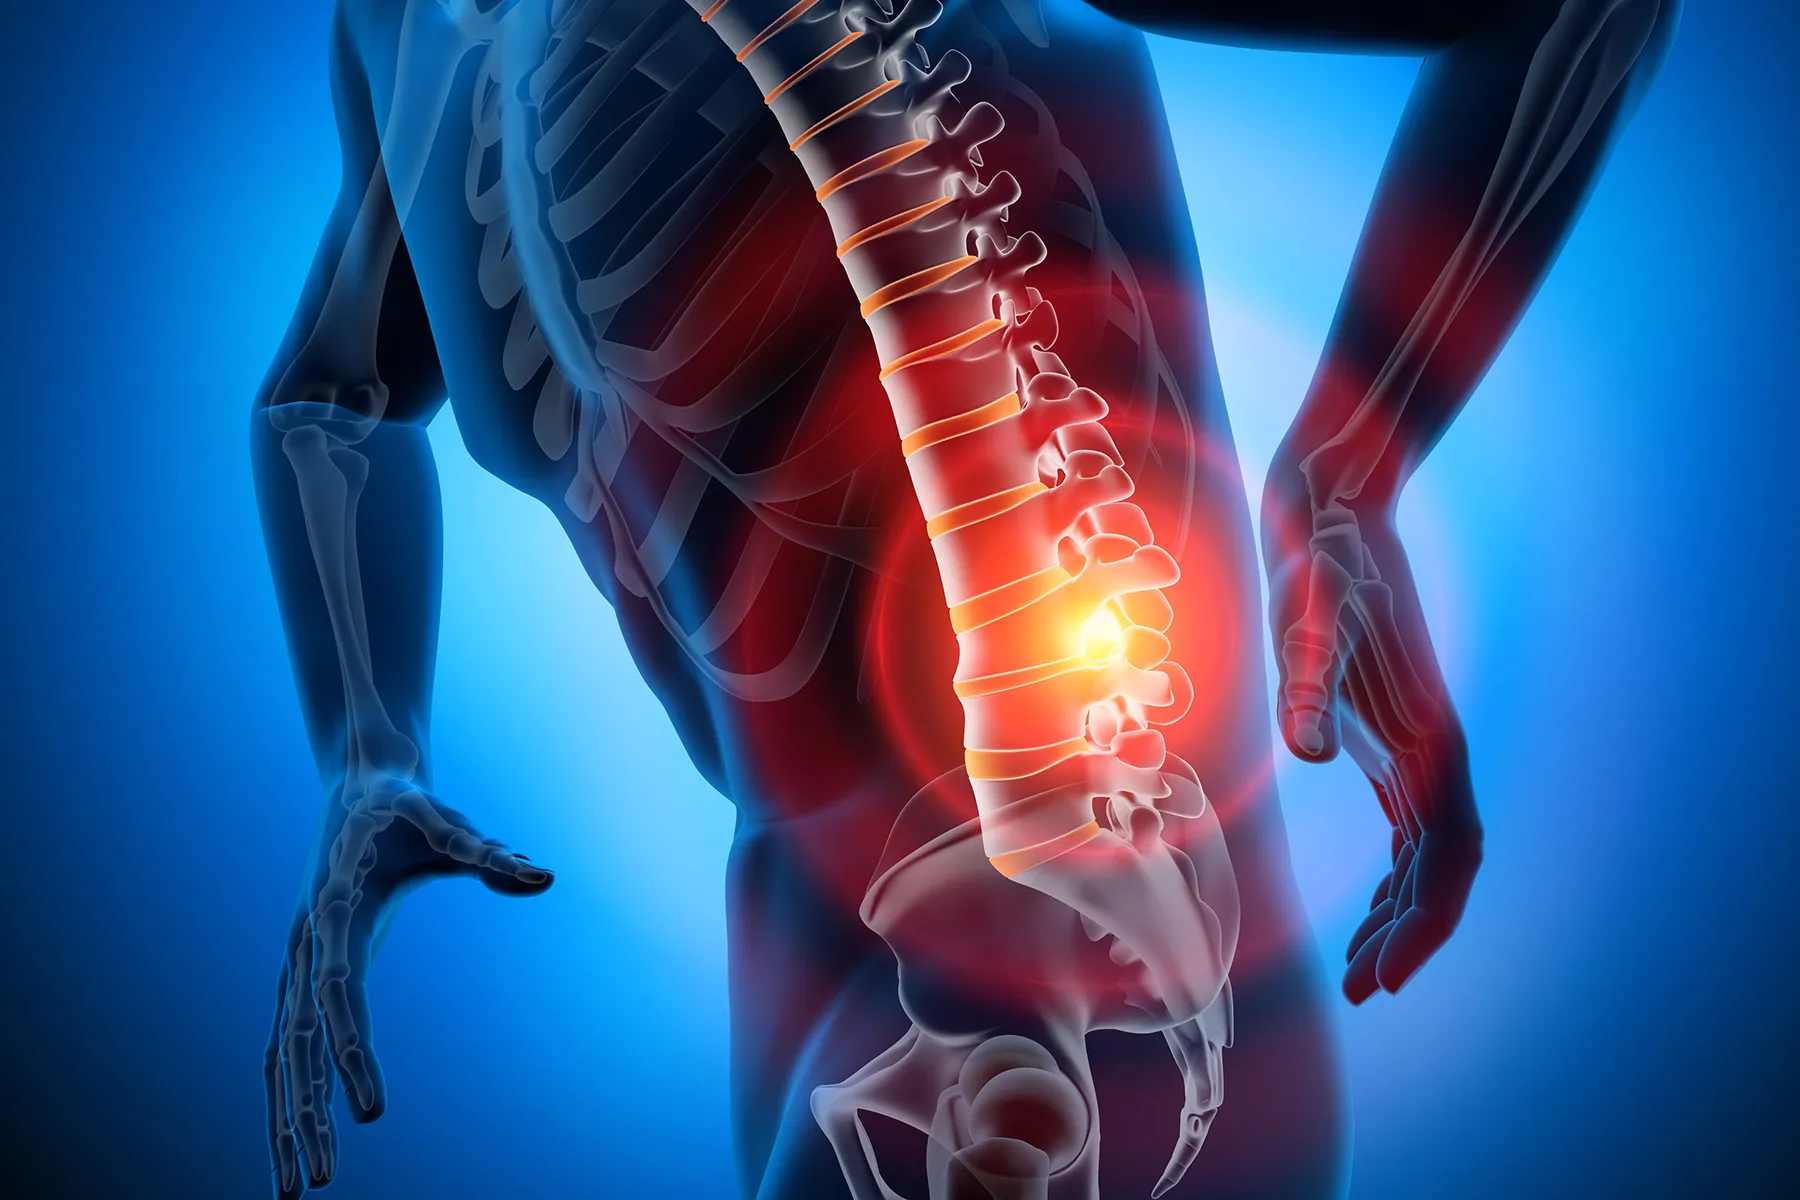 Injected 'Hydrogel' May Be New Option Against Back Pain